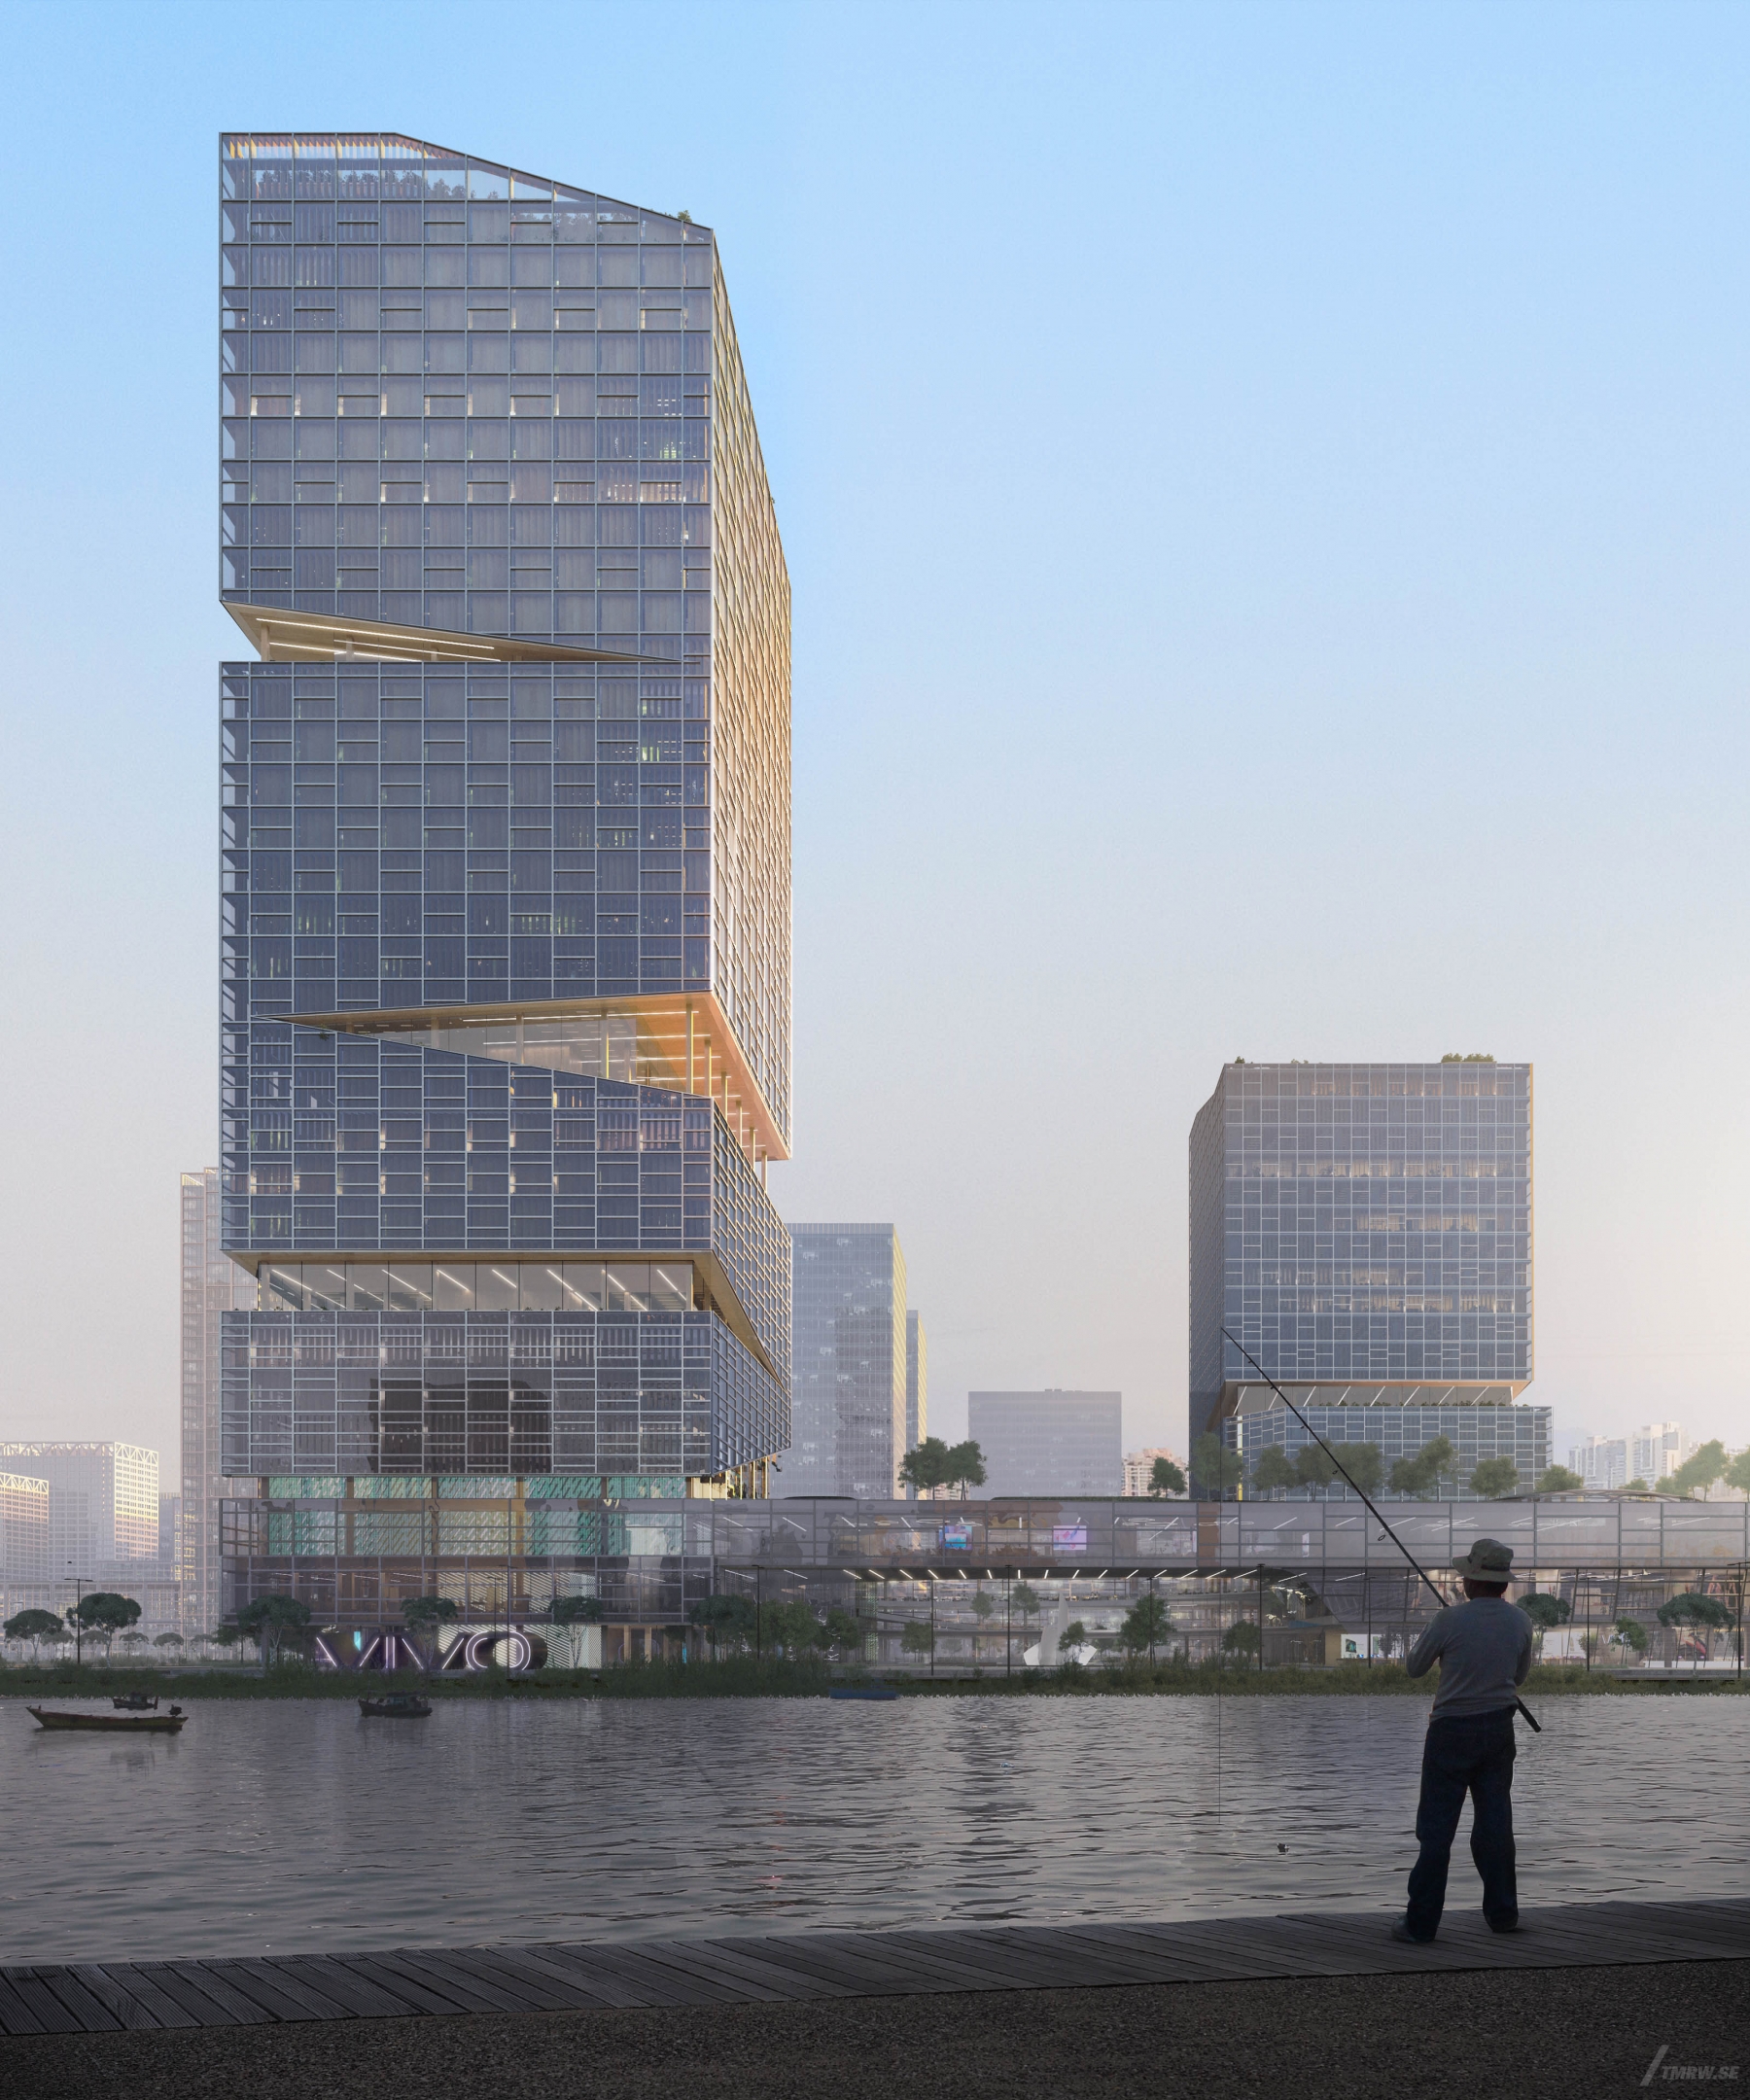 Architectural visualization of Hangzhou for NBBJ, an office tower during day light from a street view.